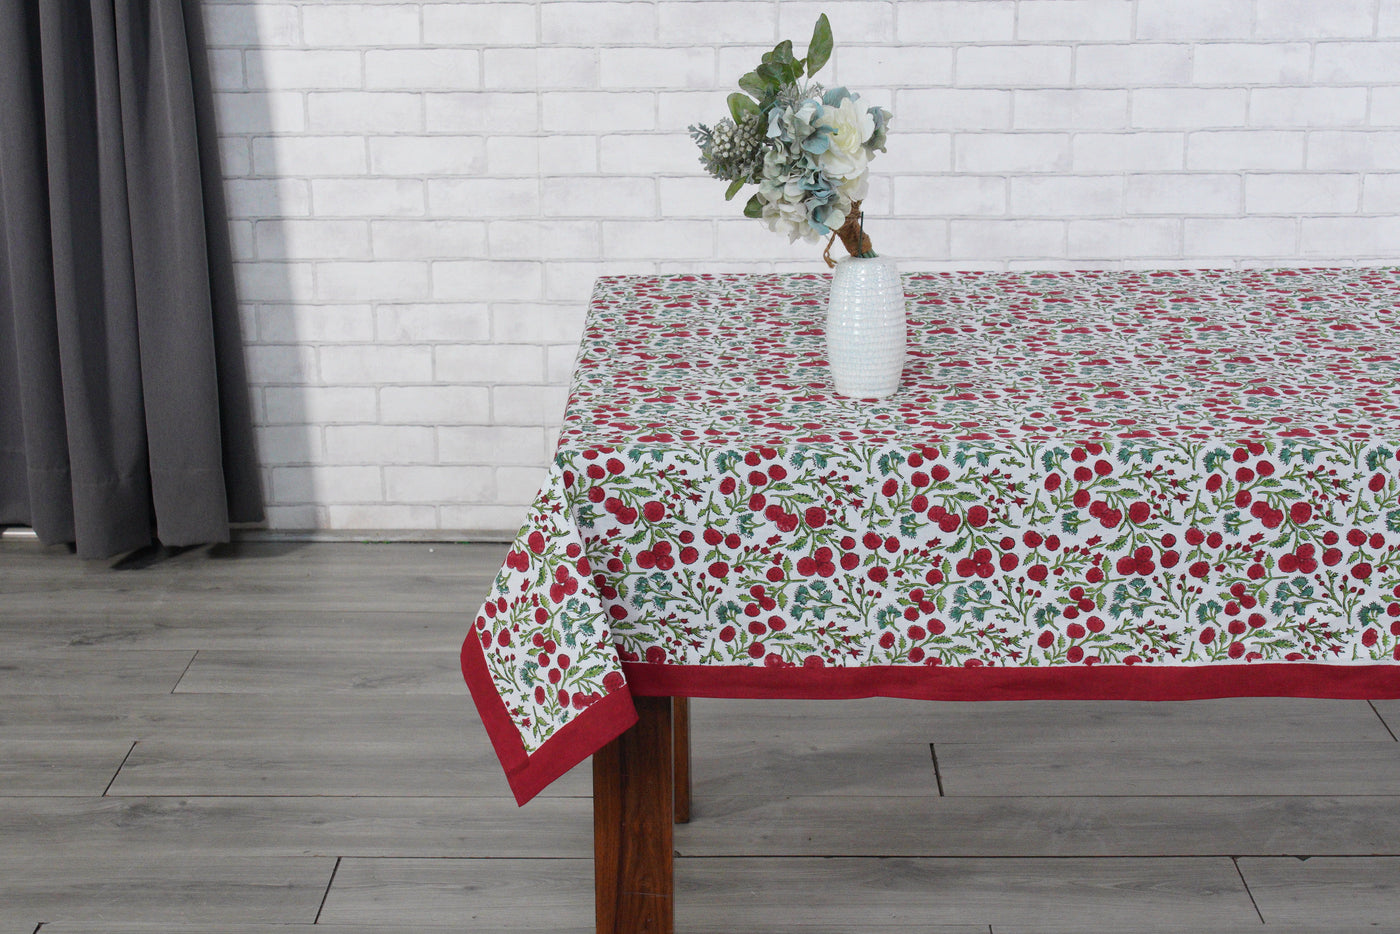 "Fabricrush Cherry Red Block Print 100% Pure Cotton Tablecloth And Table Cover For Farmhouse Wedding Holiday Gifts "